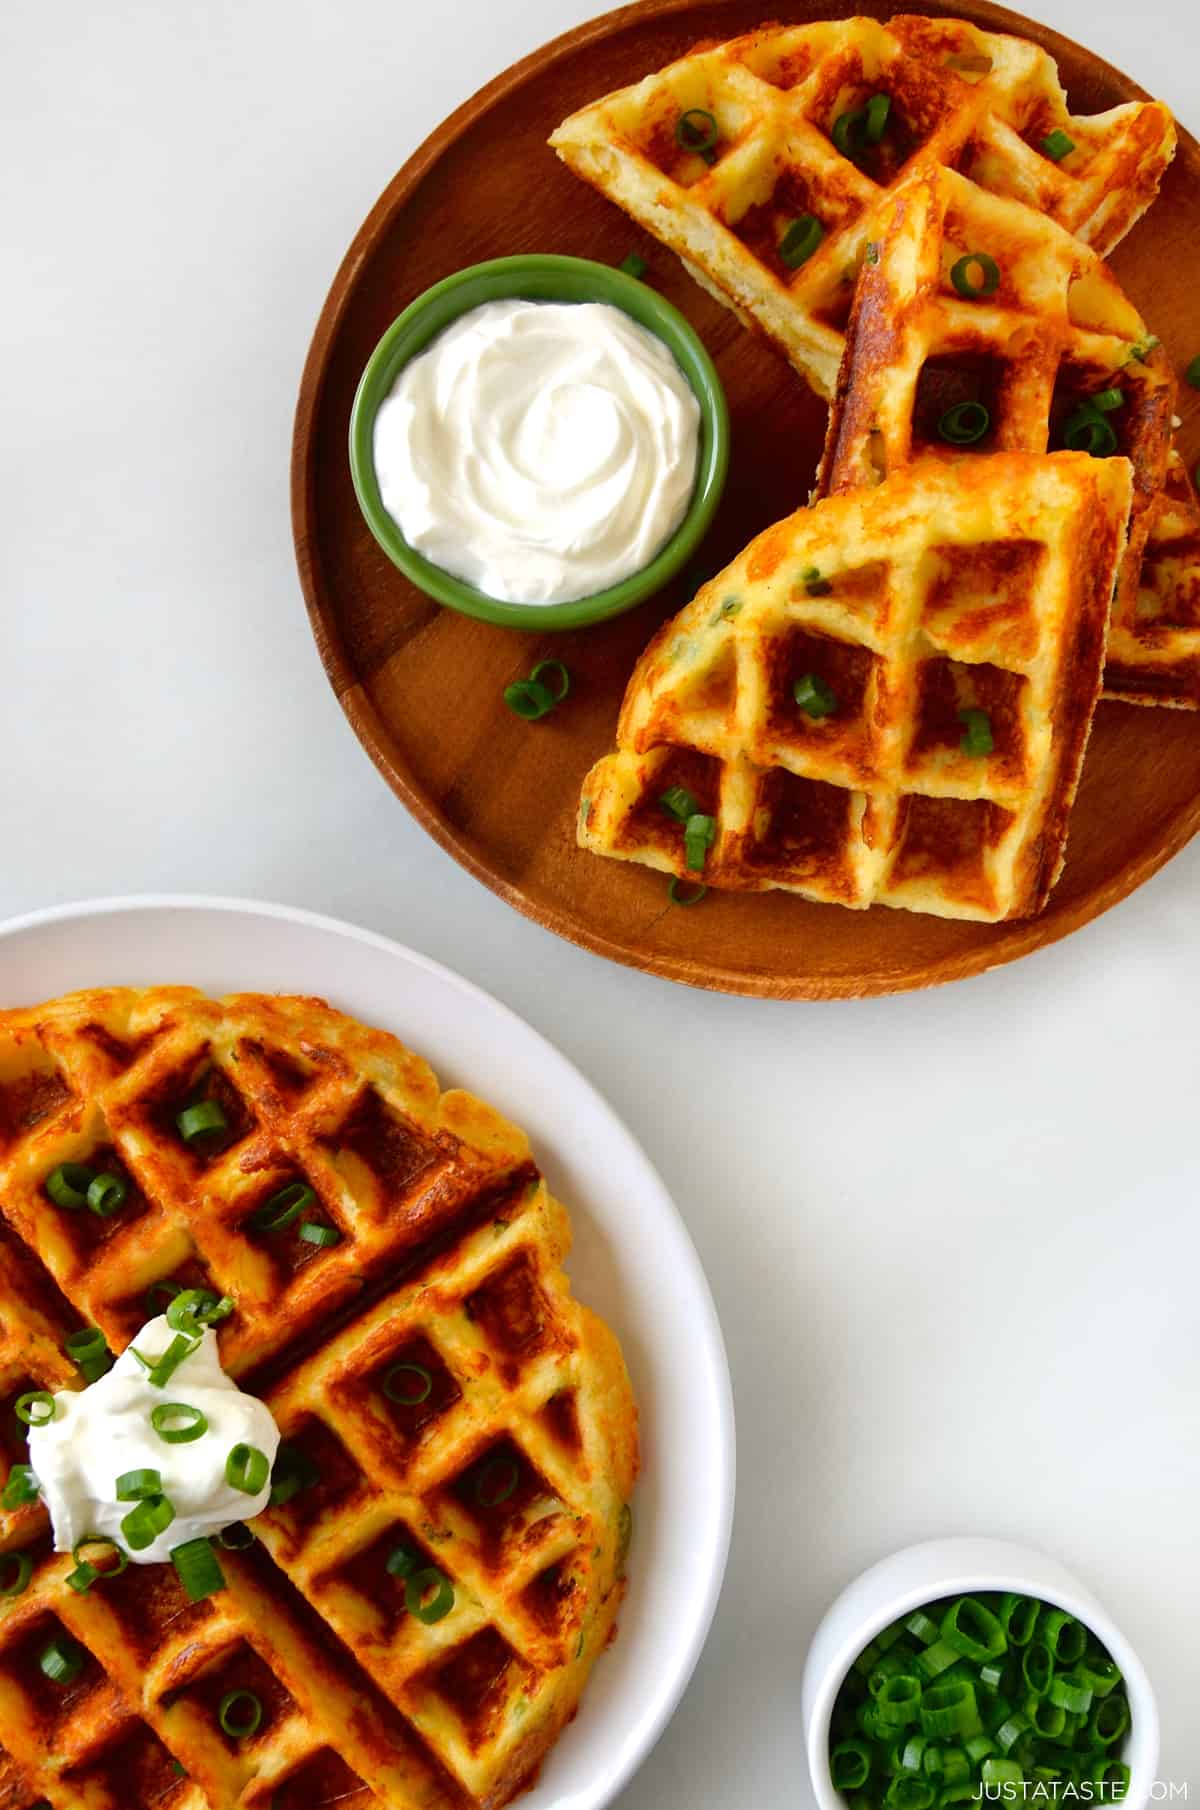 Two plates containing mashed potato waffles topped with sour cream.